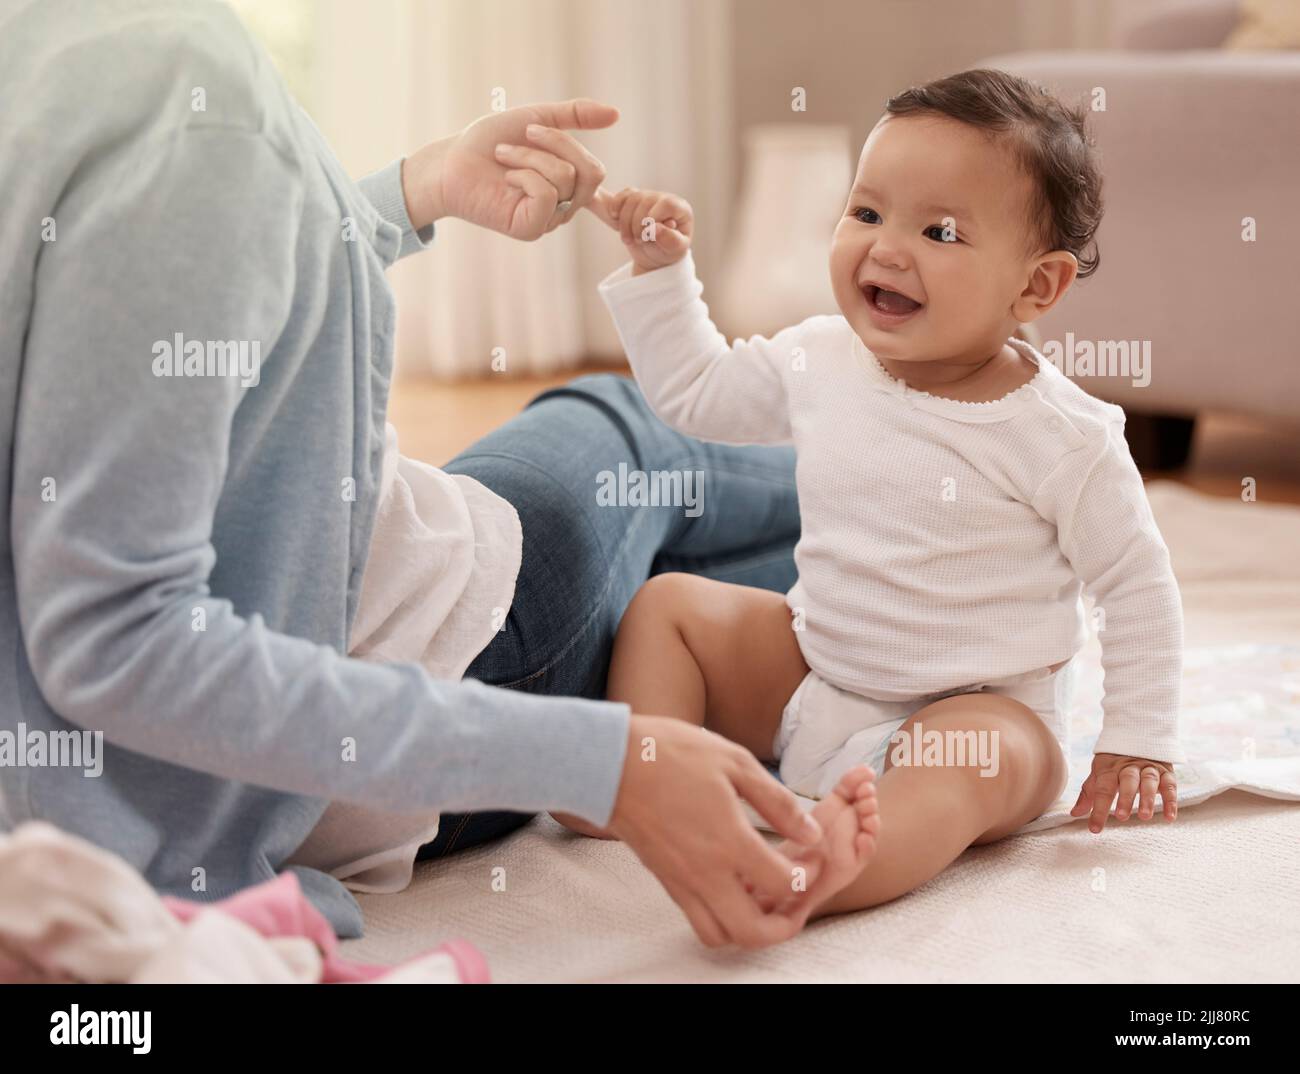 Adorable doesnt begin to describe her. an adorable baby girl sharing a playful moment with her mother at home. Stock Photo